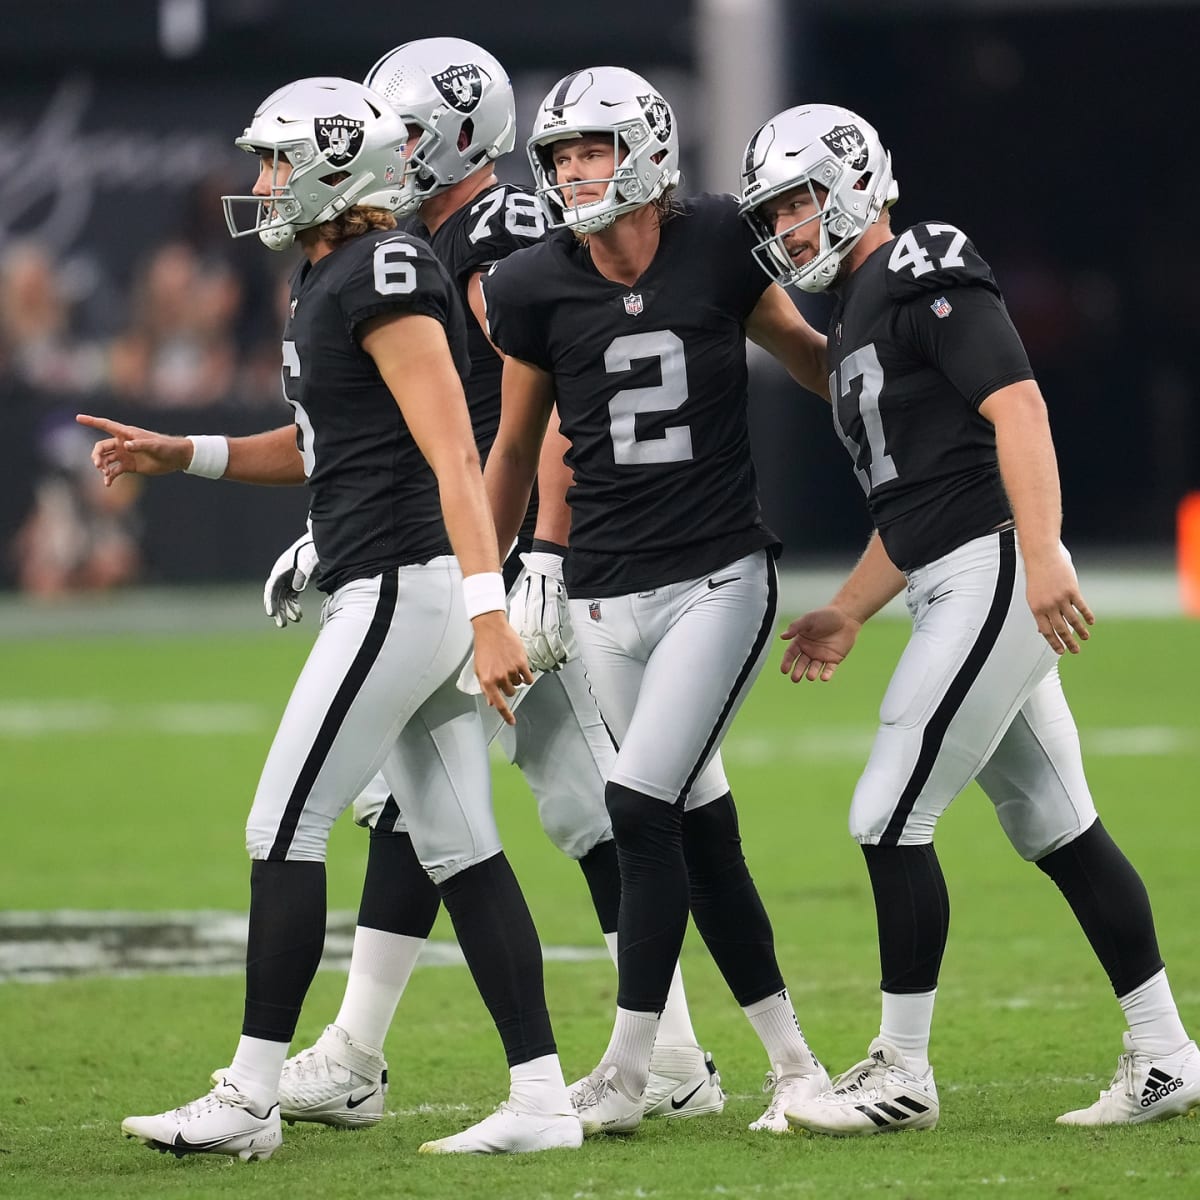 Raiders Trio Formed Lifelong Friendship: 'We Can Lean on Each Other